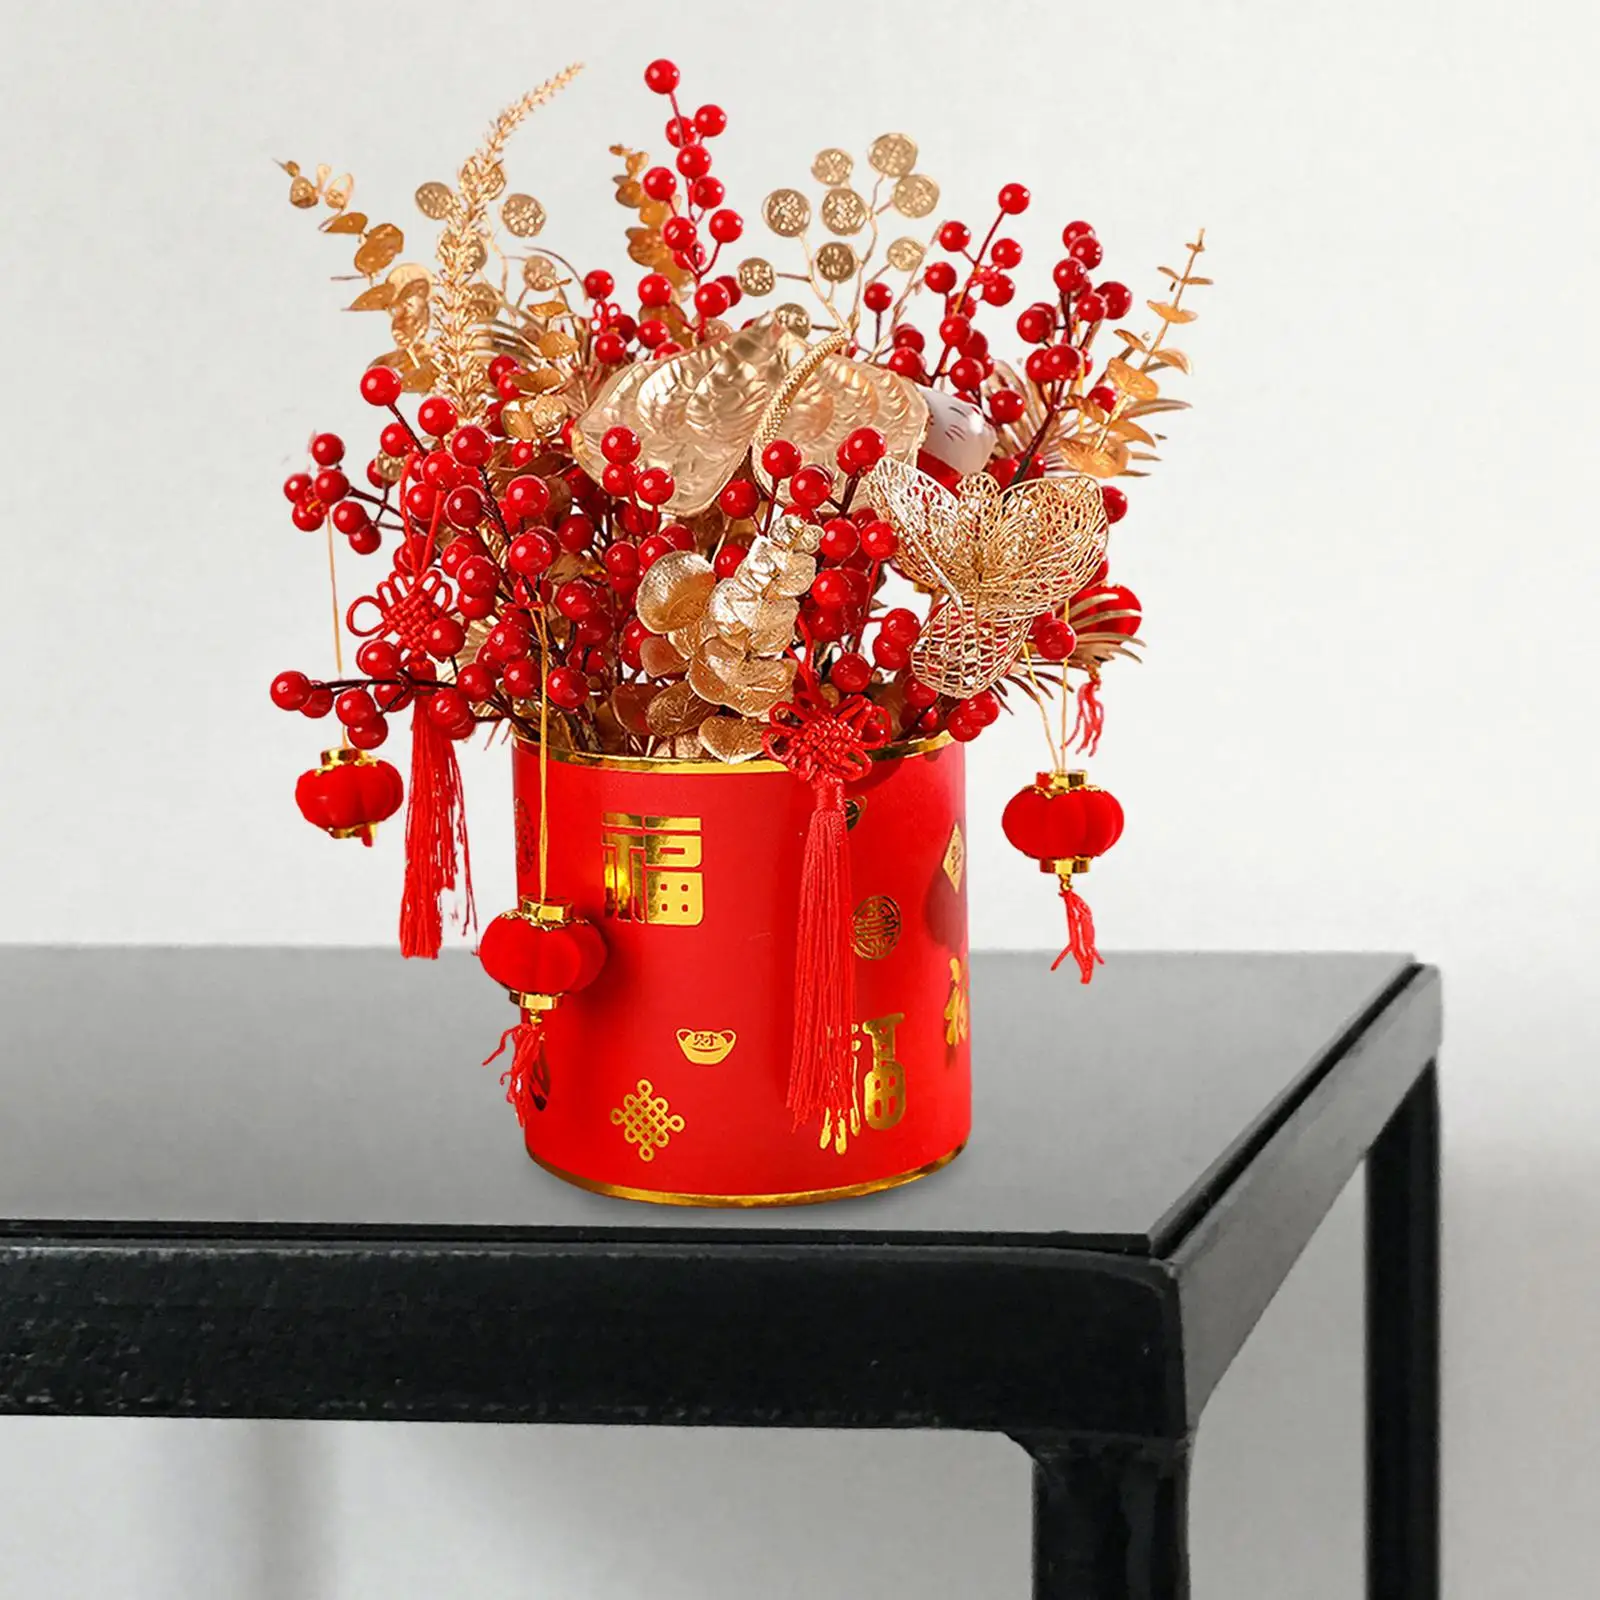 Simulation Berries Flowerpot Chinese New Year Table Decoration for Bonsai Kitchen Countertop Festival Gift Collectible